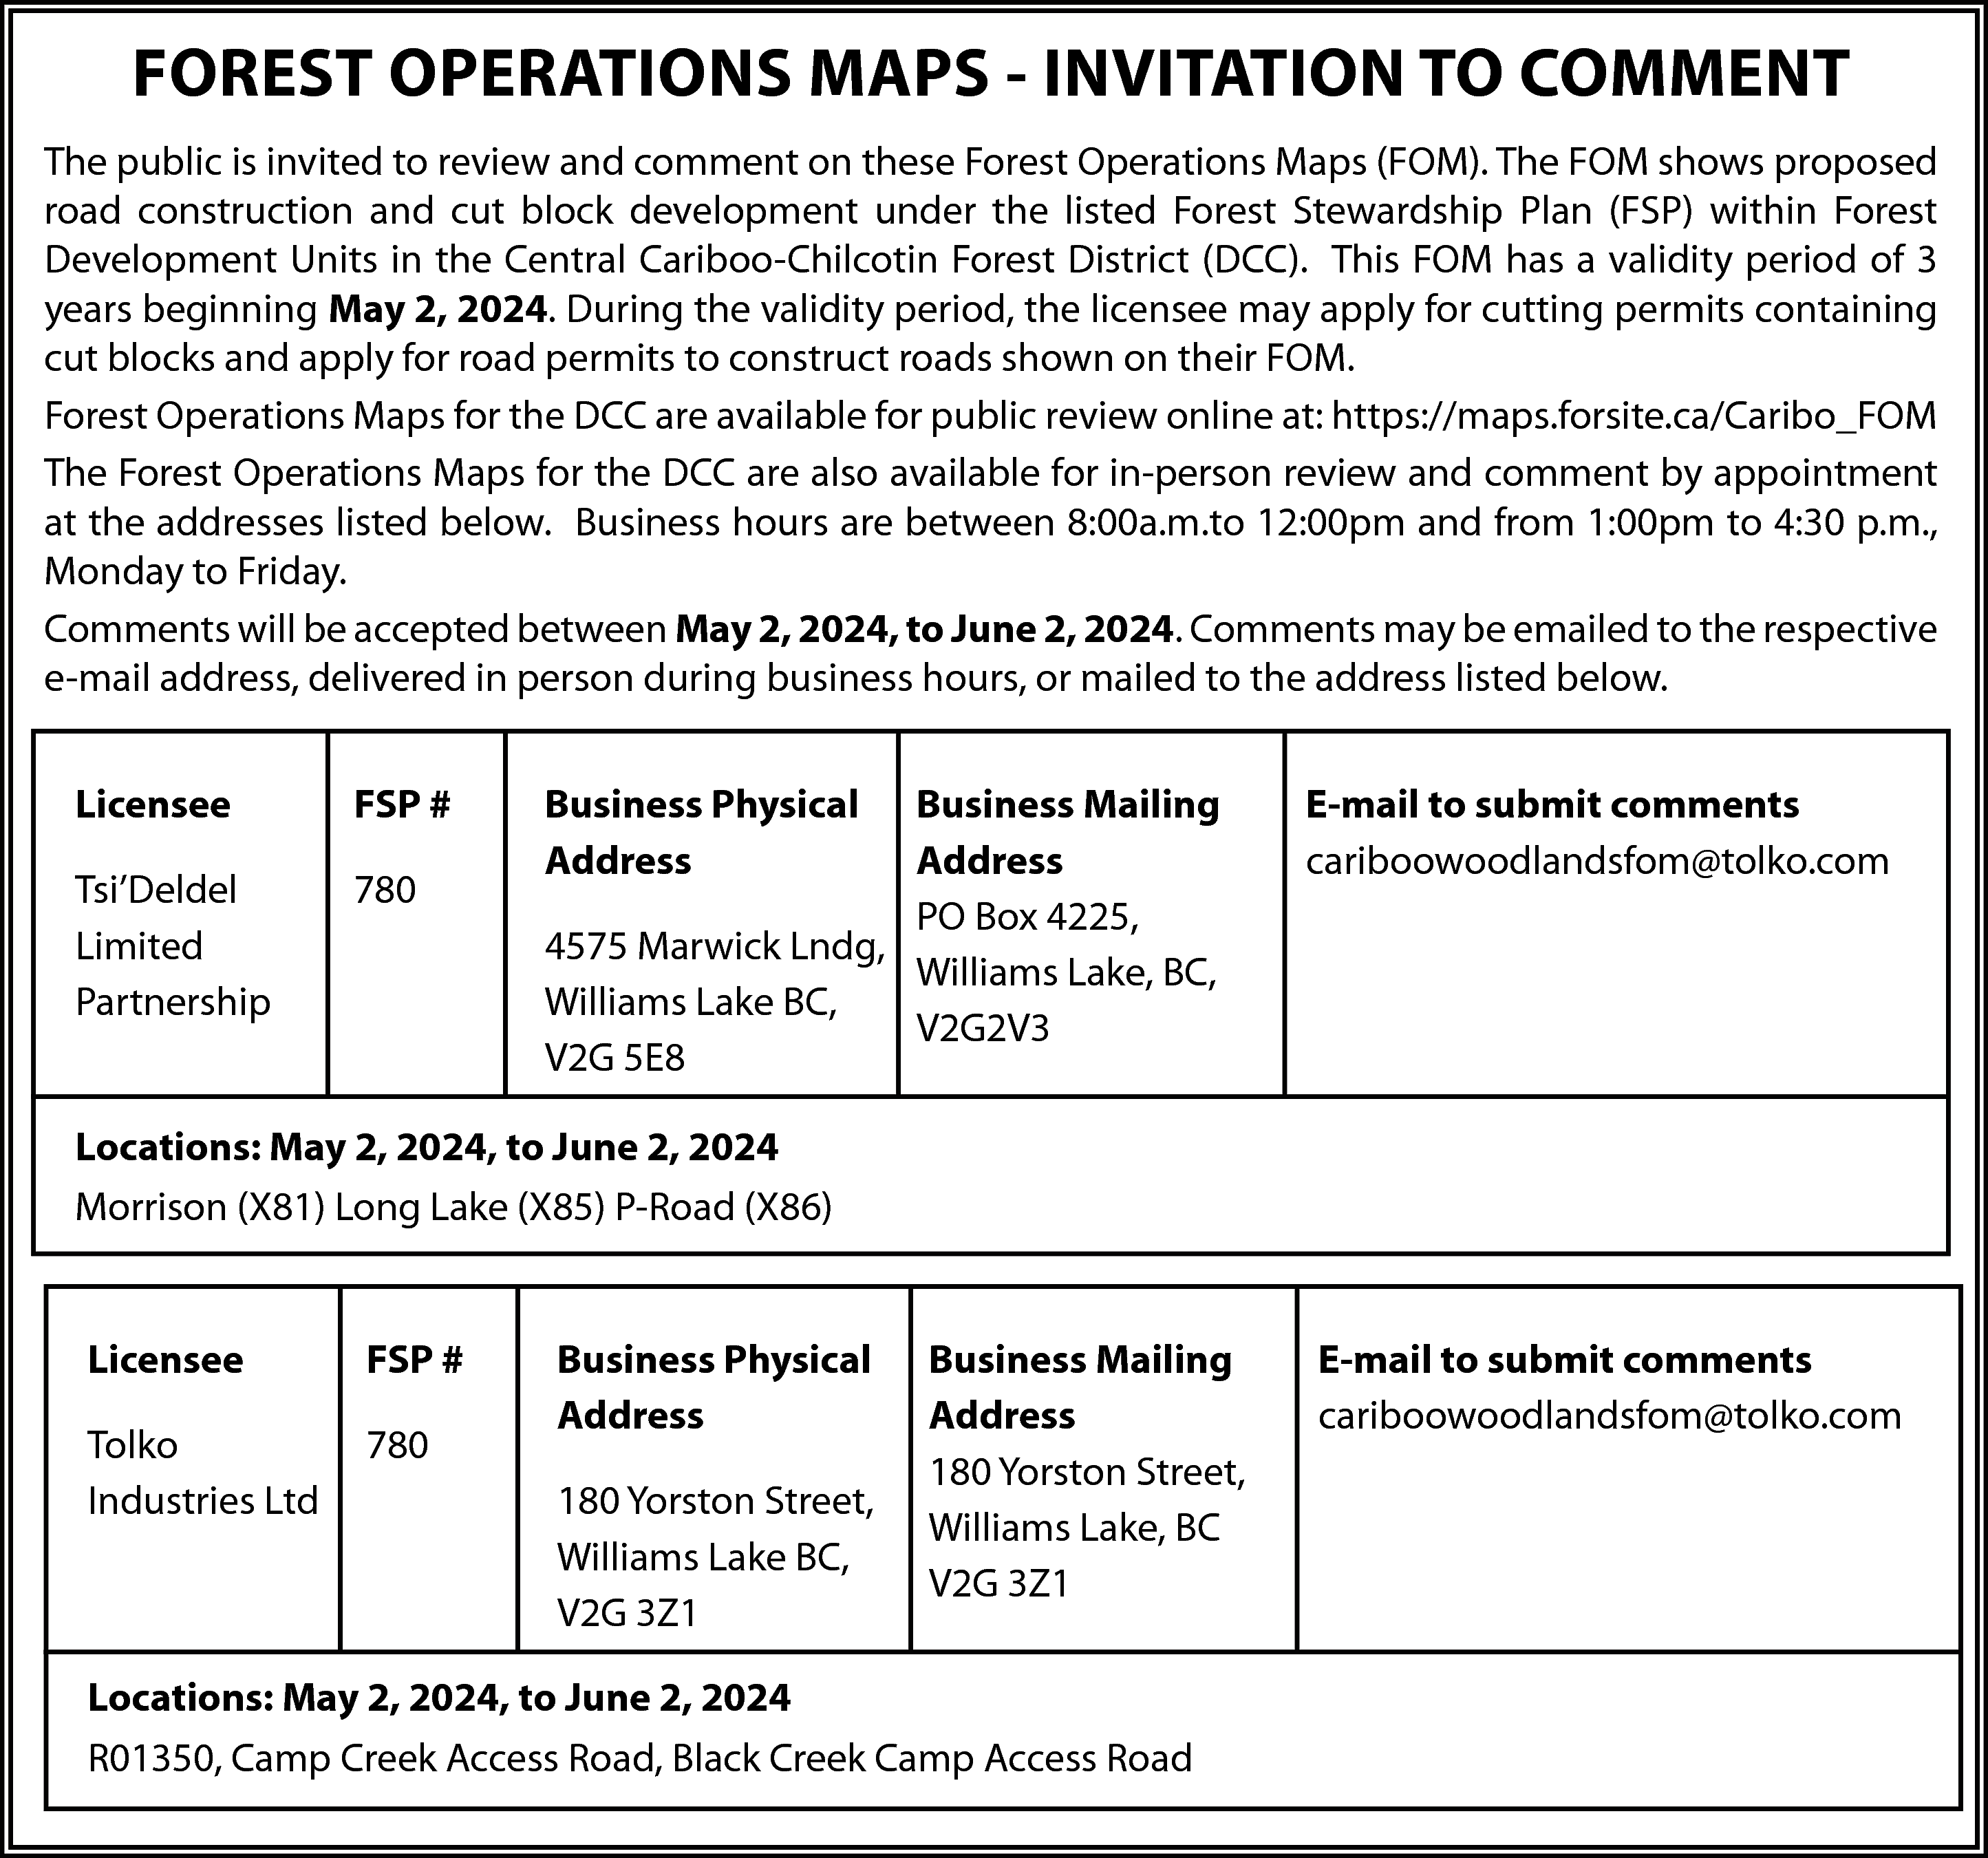 FOREST OPERATIONS MAPS - INVITATION  FOREST OPERATIONS MAPS - INVITATION TO COMMENT  The public is invited to review and comment on these Forest Operations Maps (FOM). The FOM shows proposed  road construction and cut block development under the listed Forest Stewardship Plan (FSP) within Forest  Development Units in the Central Cariboo-Chilcotin Forest District (DCC). This FOM has a validity period of 3  years beginning May 2, 2024. During the validity period, the licensee may apply for cutting permits containing  cut blocks and apply for road permits to construct roads shown on their FOM.  Forest Operations Maps for the DCC are available for public review online at: https://maps.forsite.ca/Caribo_FOM  The Forest Operations Maps for the DCC are also available for in-person review and comment by appointment  at the addresses listed below. Business hours are between 8:00a.m.to 12:00pm and from 1:00pm to 4:30 p.m.,  Monday to Friday.  Comments will be accepted between May 2, 2024, to June 2, 2024. Comments may be emailed to the respective  e-mail address, delivered in person during business hours, or mailed to the address listed below.  Licensee    FSP #    Tsi’Deldel  Limited  Partnership    780    Business Physical  Address    Business Mailing  Address  PO Box 4225,  4575 Marwick Lndg,  Williams Lake, BC,  Williams Lake BC,  V2G2V3  V2G 5E8    E-mail to submit comments  cariboowoodlandsfom@tolko.com    Locations: May 2, 2024, to June 2, 2024  Morrison (X81) Long Lake (X85) P-Road (X86)  Licensee    FSP #    Tolko  Industries Ltd    780    Business Physical  Address  180 Yorston Street,  Williams Lake BC,  V2G 3Z1    Business Mailing  Address  180 Yorston Street,  Williams Lake, BC  V2G 3Z1    Locations: May 2, 2024, to June 2, 2024  R01350, Camp Creek Access Road, Black Creek Camp Access Road    E-mail to submit comments  cariboowoodlandsfom@tolko.com    